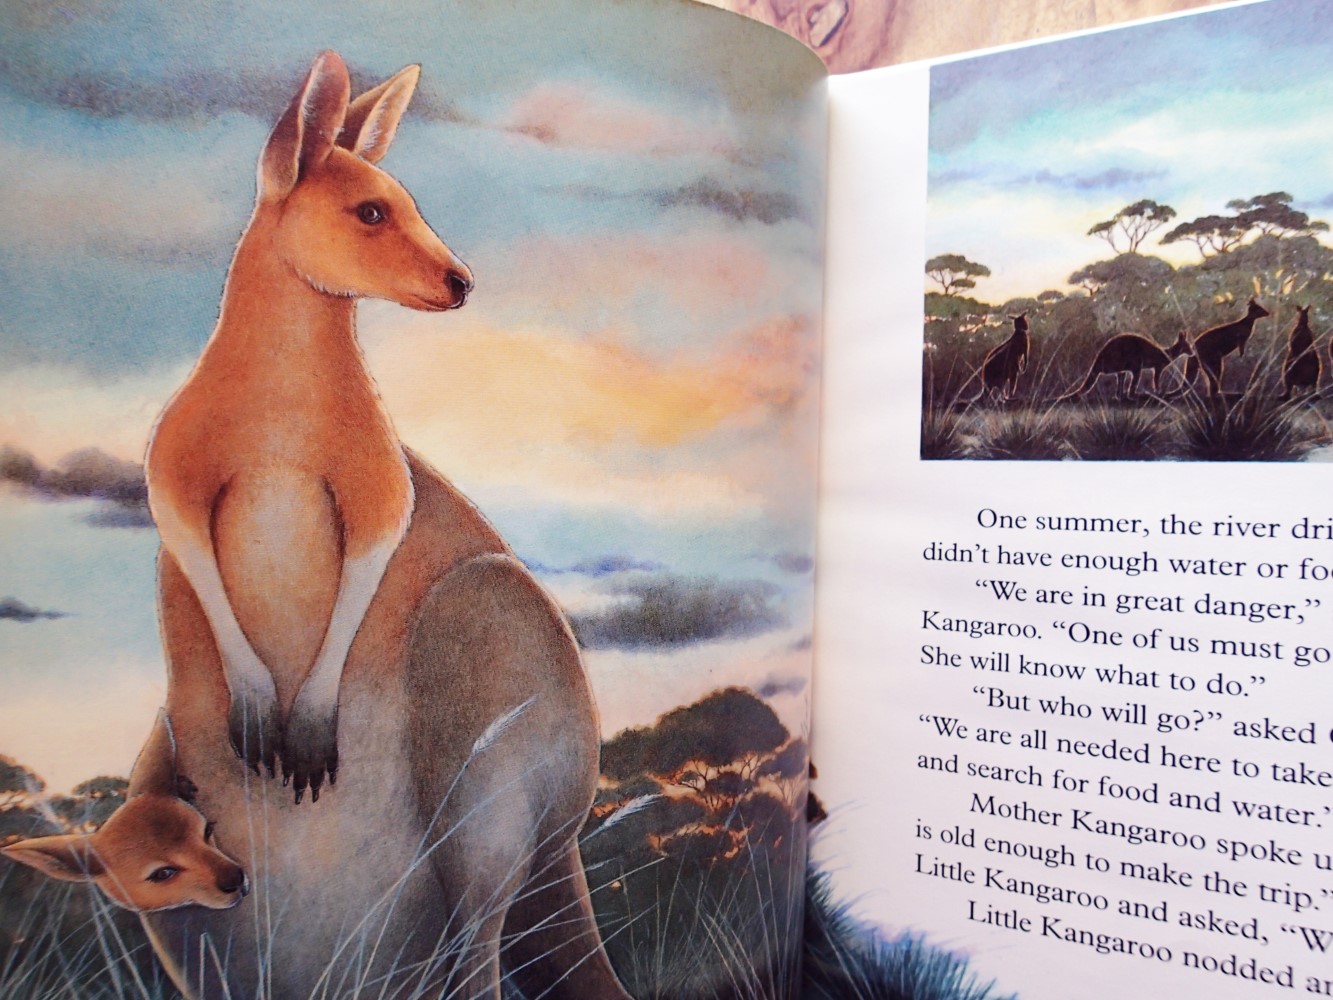 LITTLE KANGAROO FINDS HIS WAY : (English edition of KANGOUROU, PETIT FOU!)  : Reader\'s Digest Kids, Little Animal Adventures by Ariane Chottin;  (Translated & Adapted from the French by Patricia Jensen): New